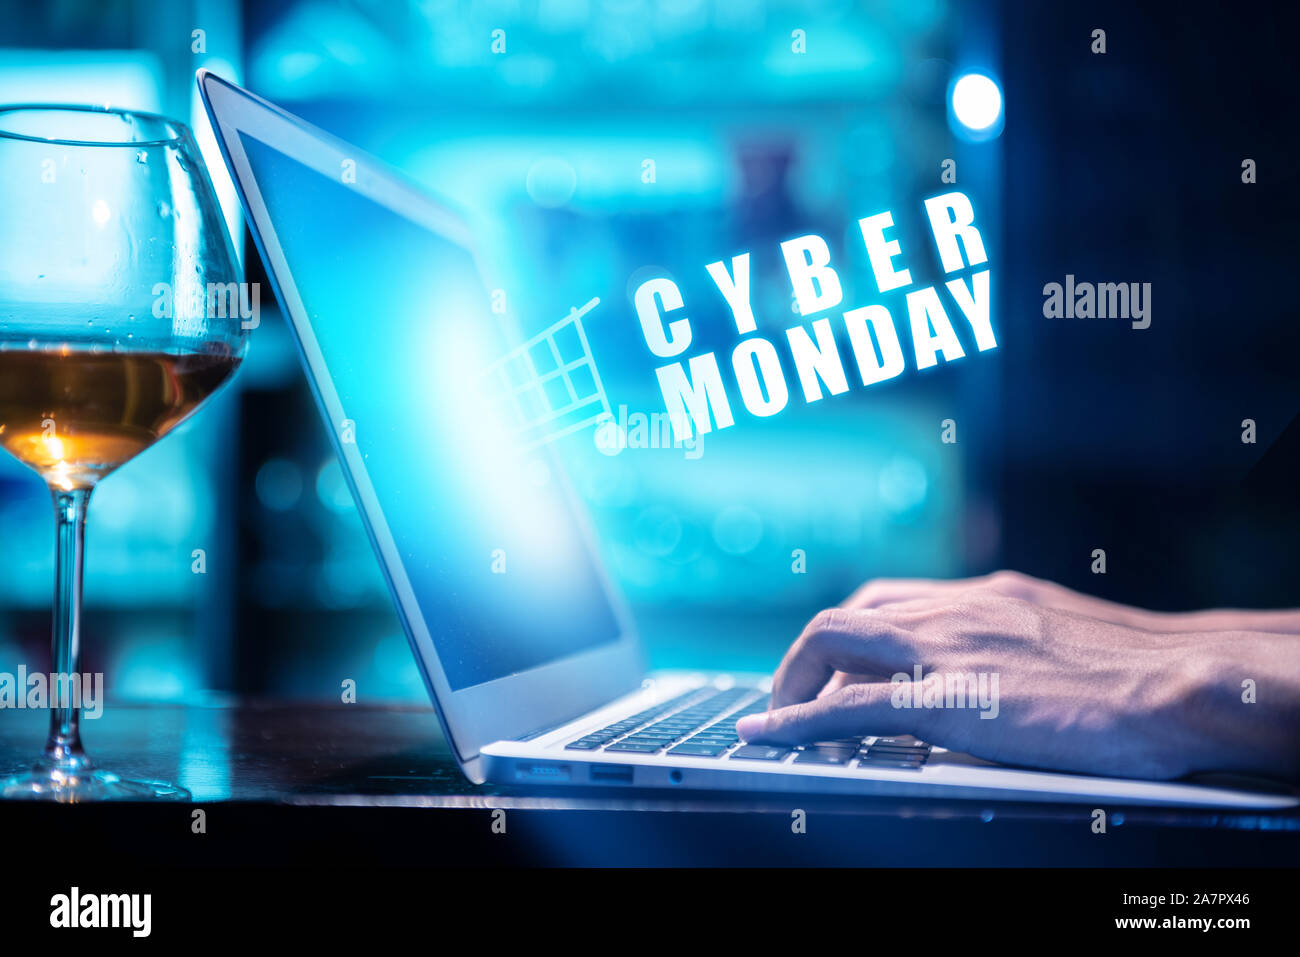 Businessman With Cyber Monday Advert On The Laptop Screen On The